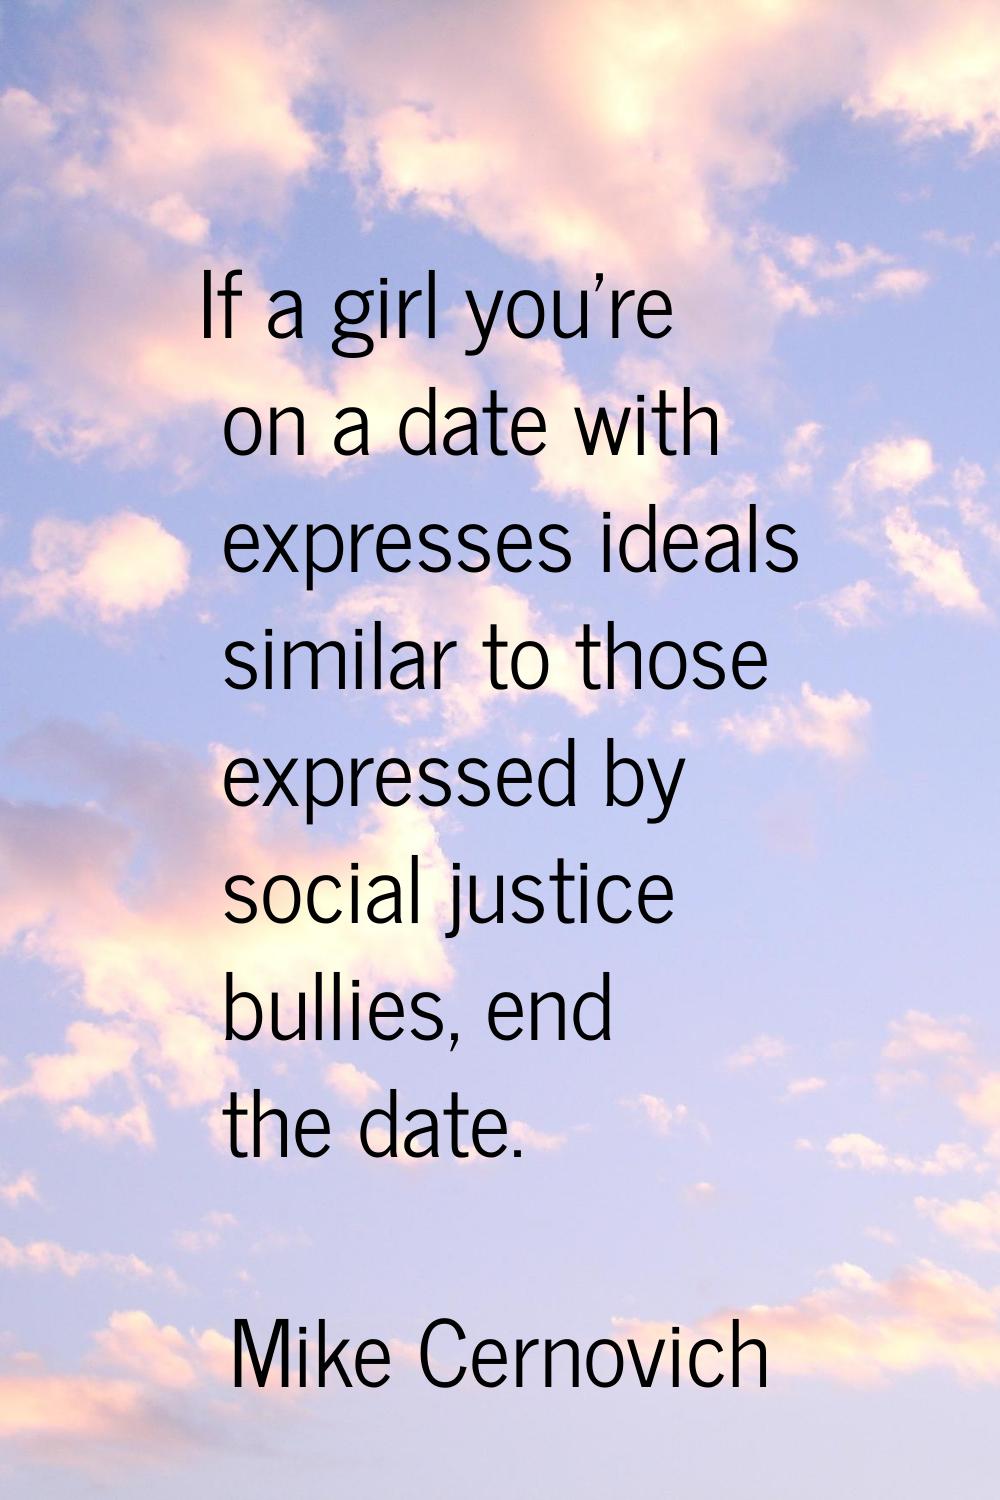 If a girl you're on a date with expresses ideals similar to those expressed by social justice bulli